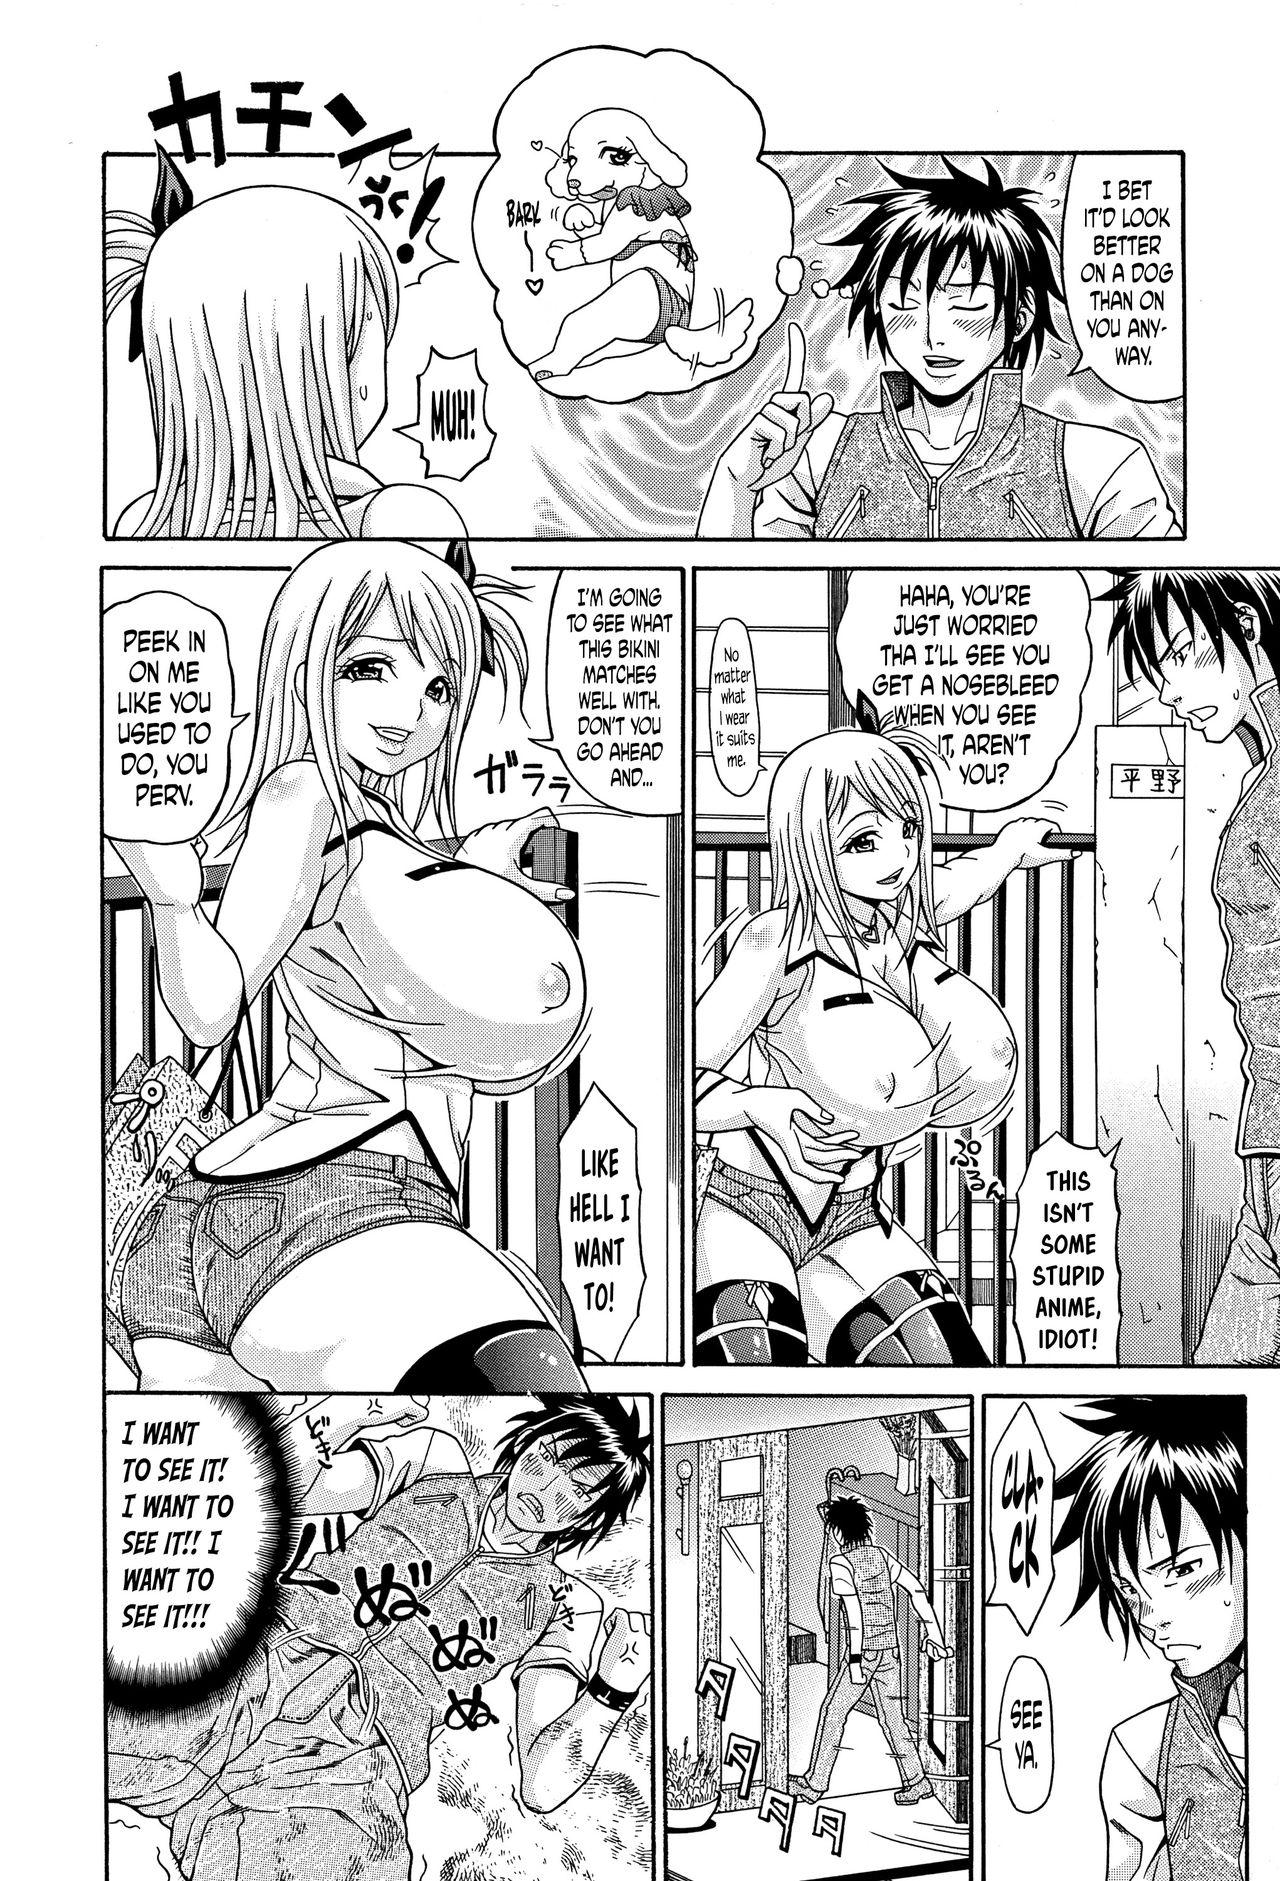 [Andou Hiroyuki] Mamire Chichi - Sticky Tits Feel Hot All Over. Ch.1-11 [English] [doujin-moe.us] 38